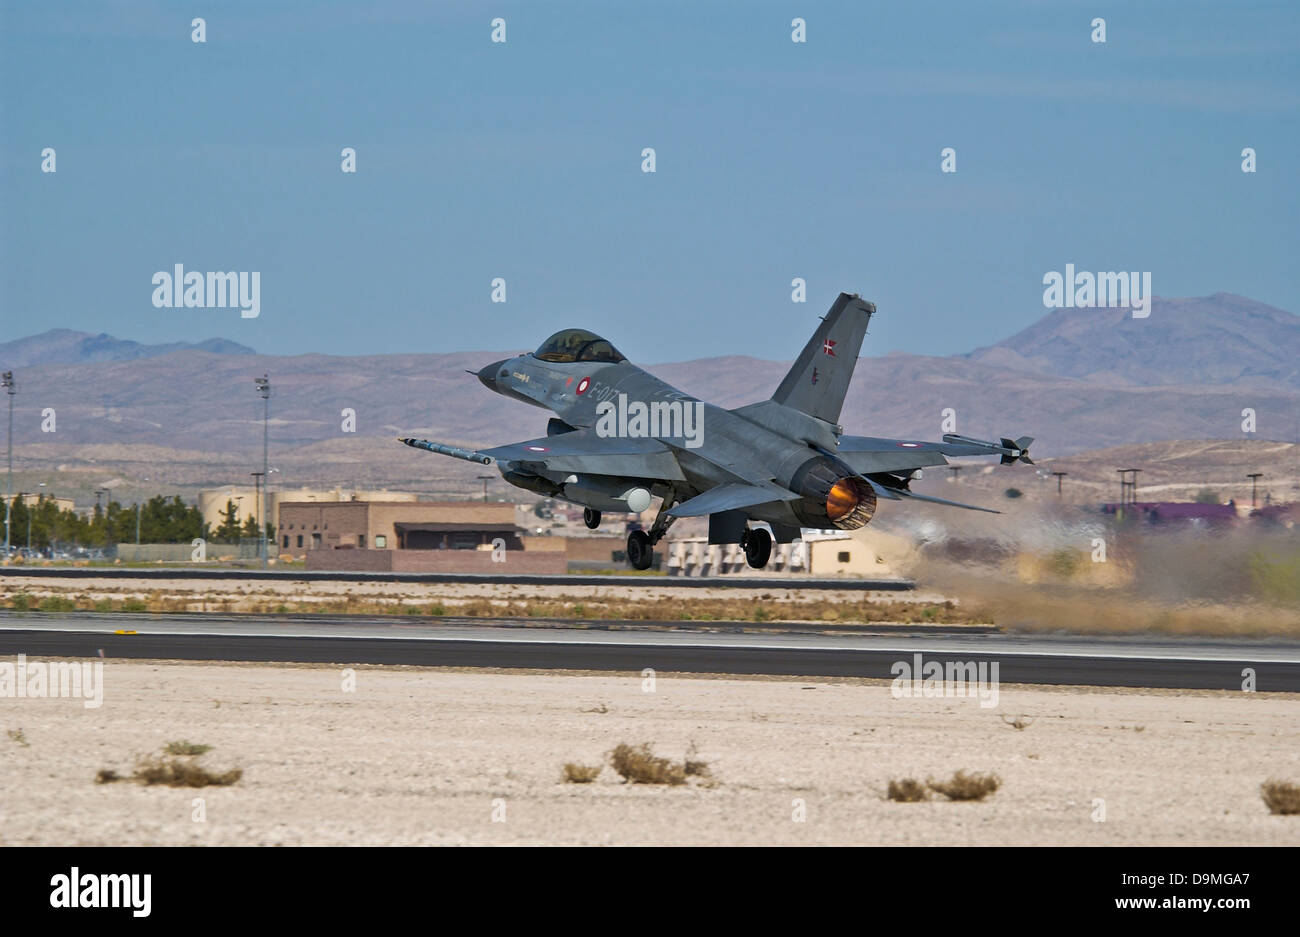 An F-16A Fighting Falcon of the Royal Danish Air Force taking off from Nellis Air Force Base, Nevada. Stock Photo